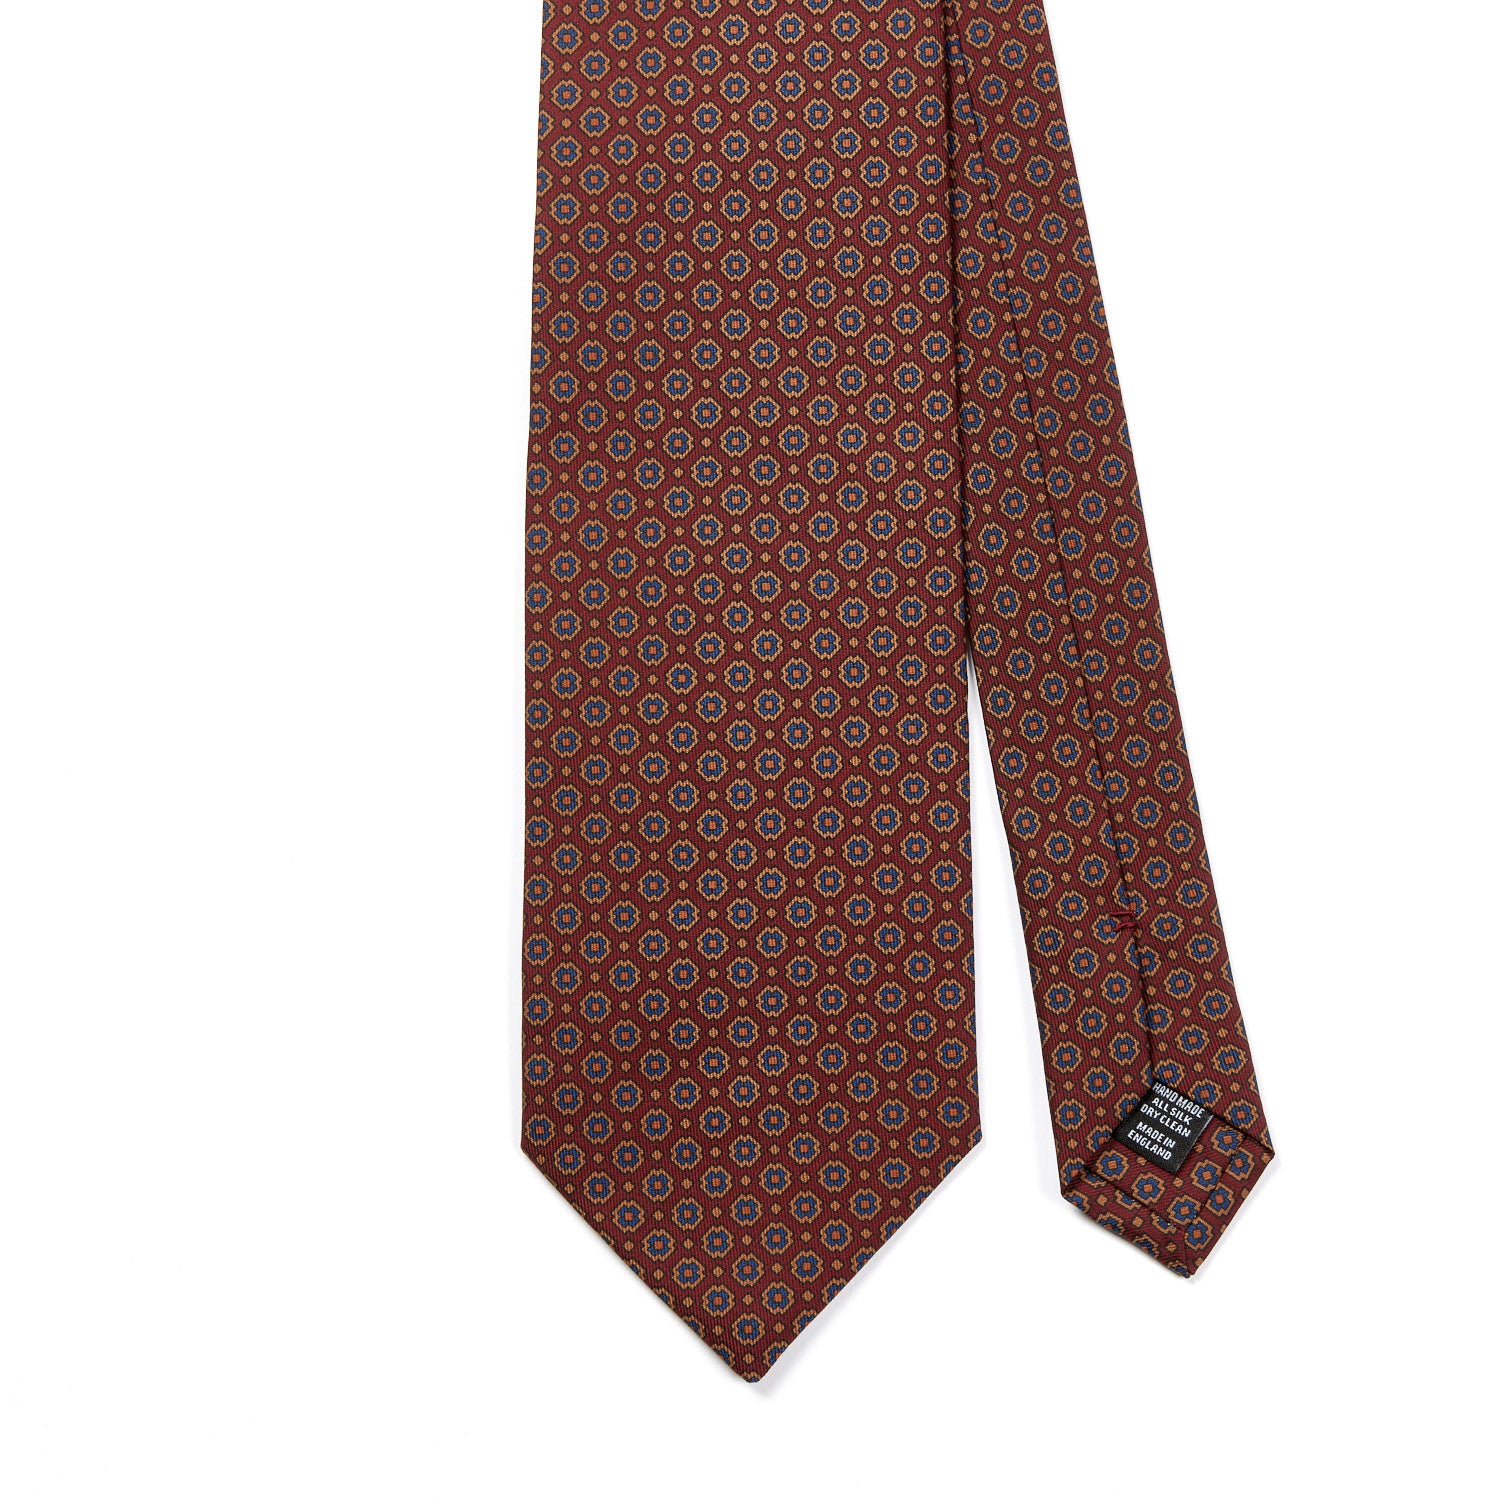 A handmade Sovereign Grade Rust Small Floral Ancient Madder Tie with a geometric pattern of the highest quality craftsmanship from KirbyAllison.com.